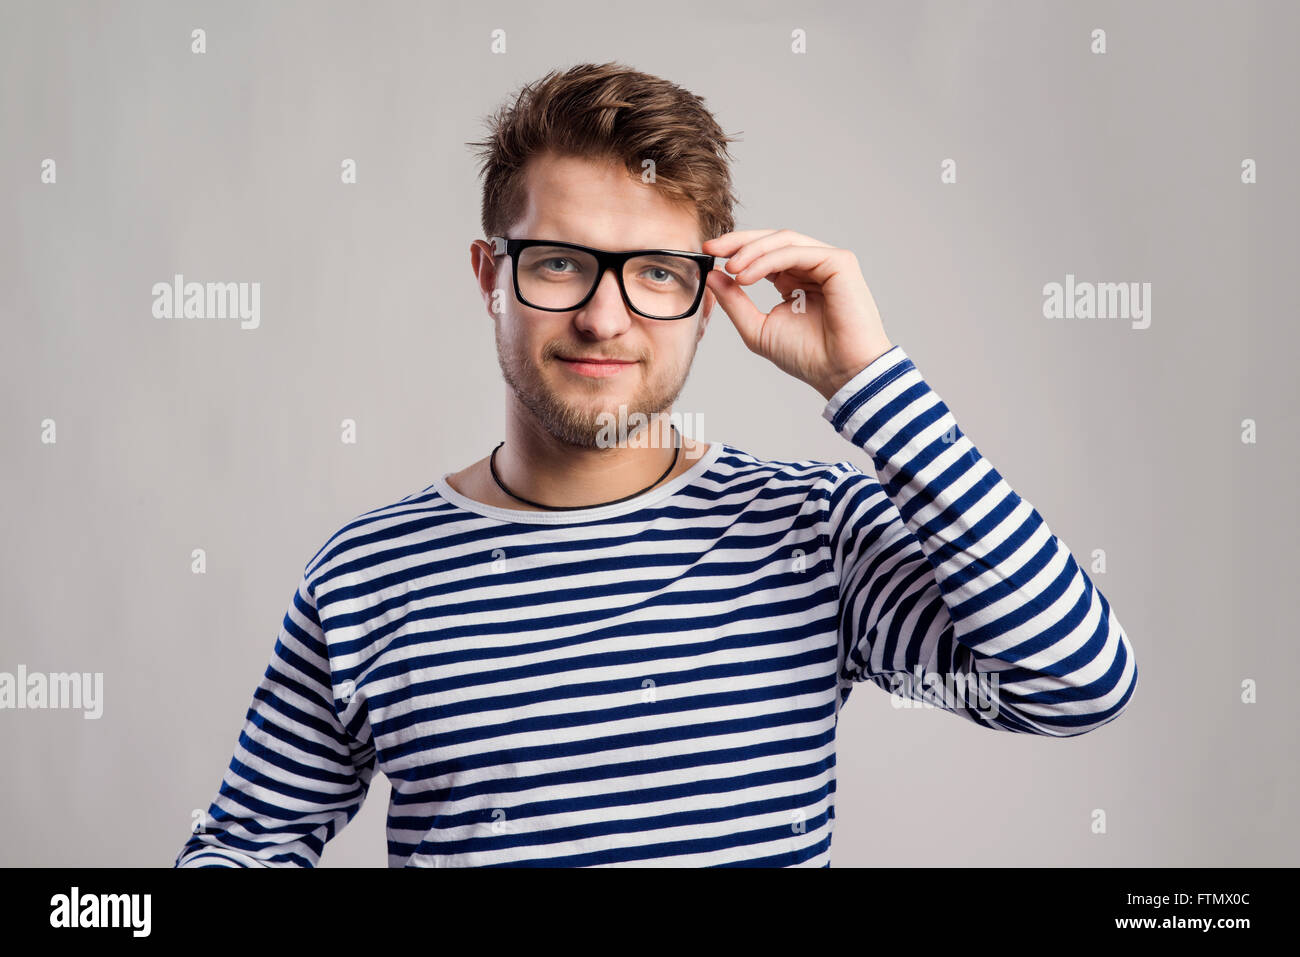 Man in striped t-shirt and eyeglasses against gray background. Stock Photo